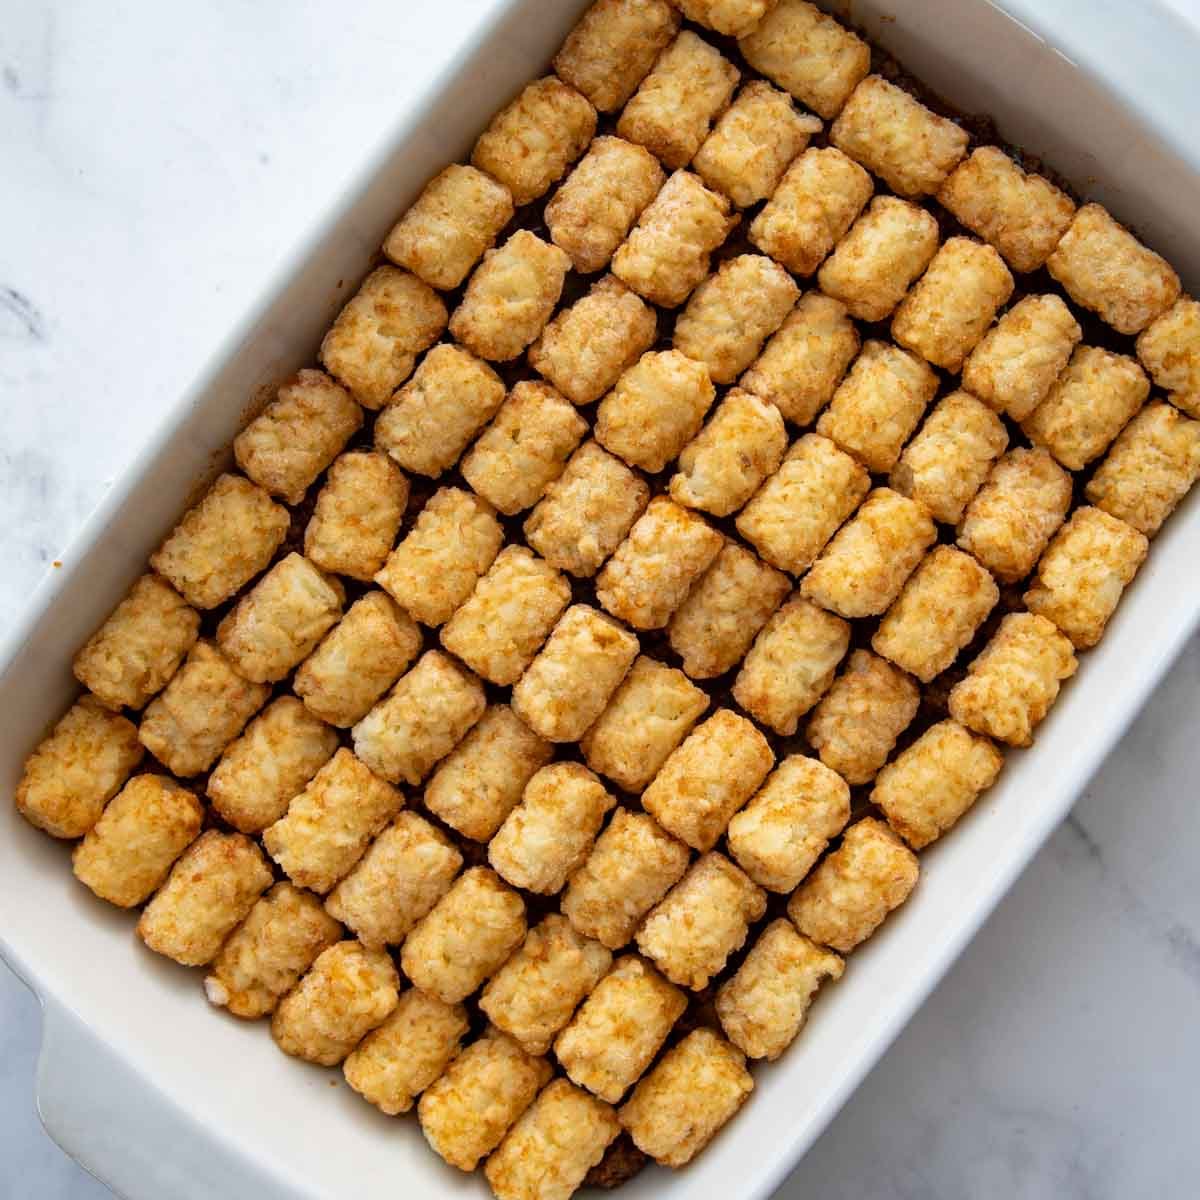 unbaked tater tots lined in a casserole dish.